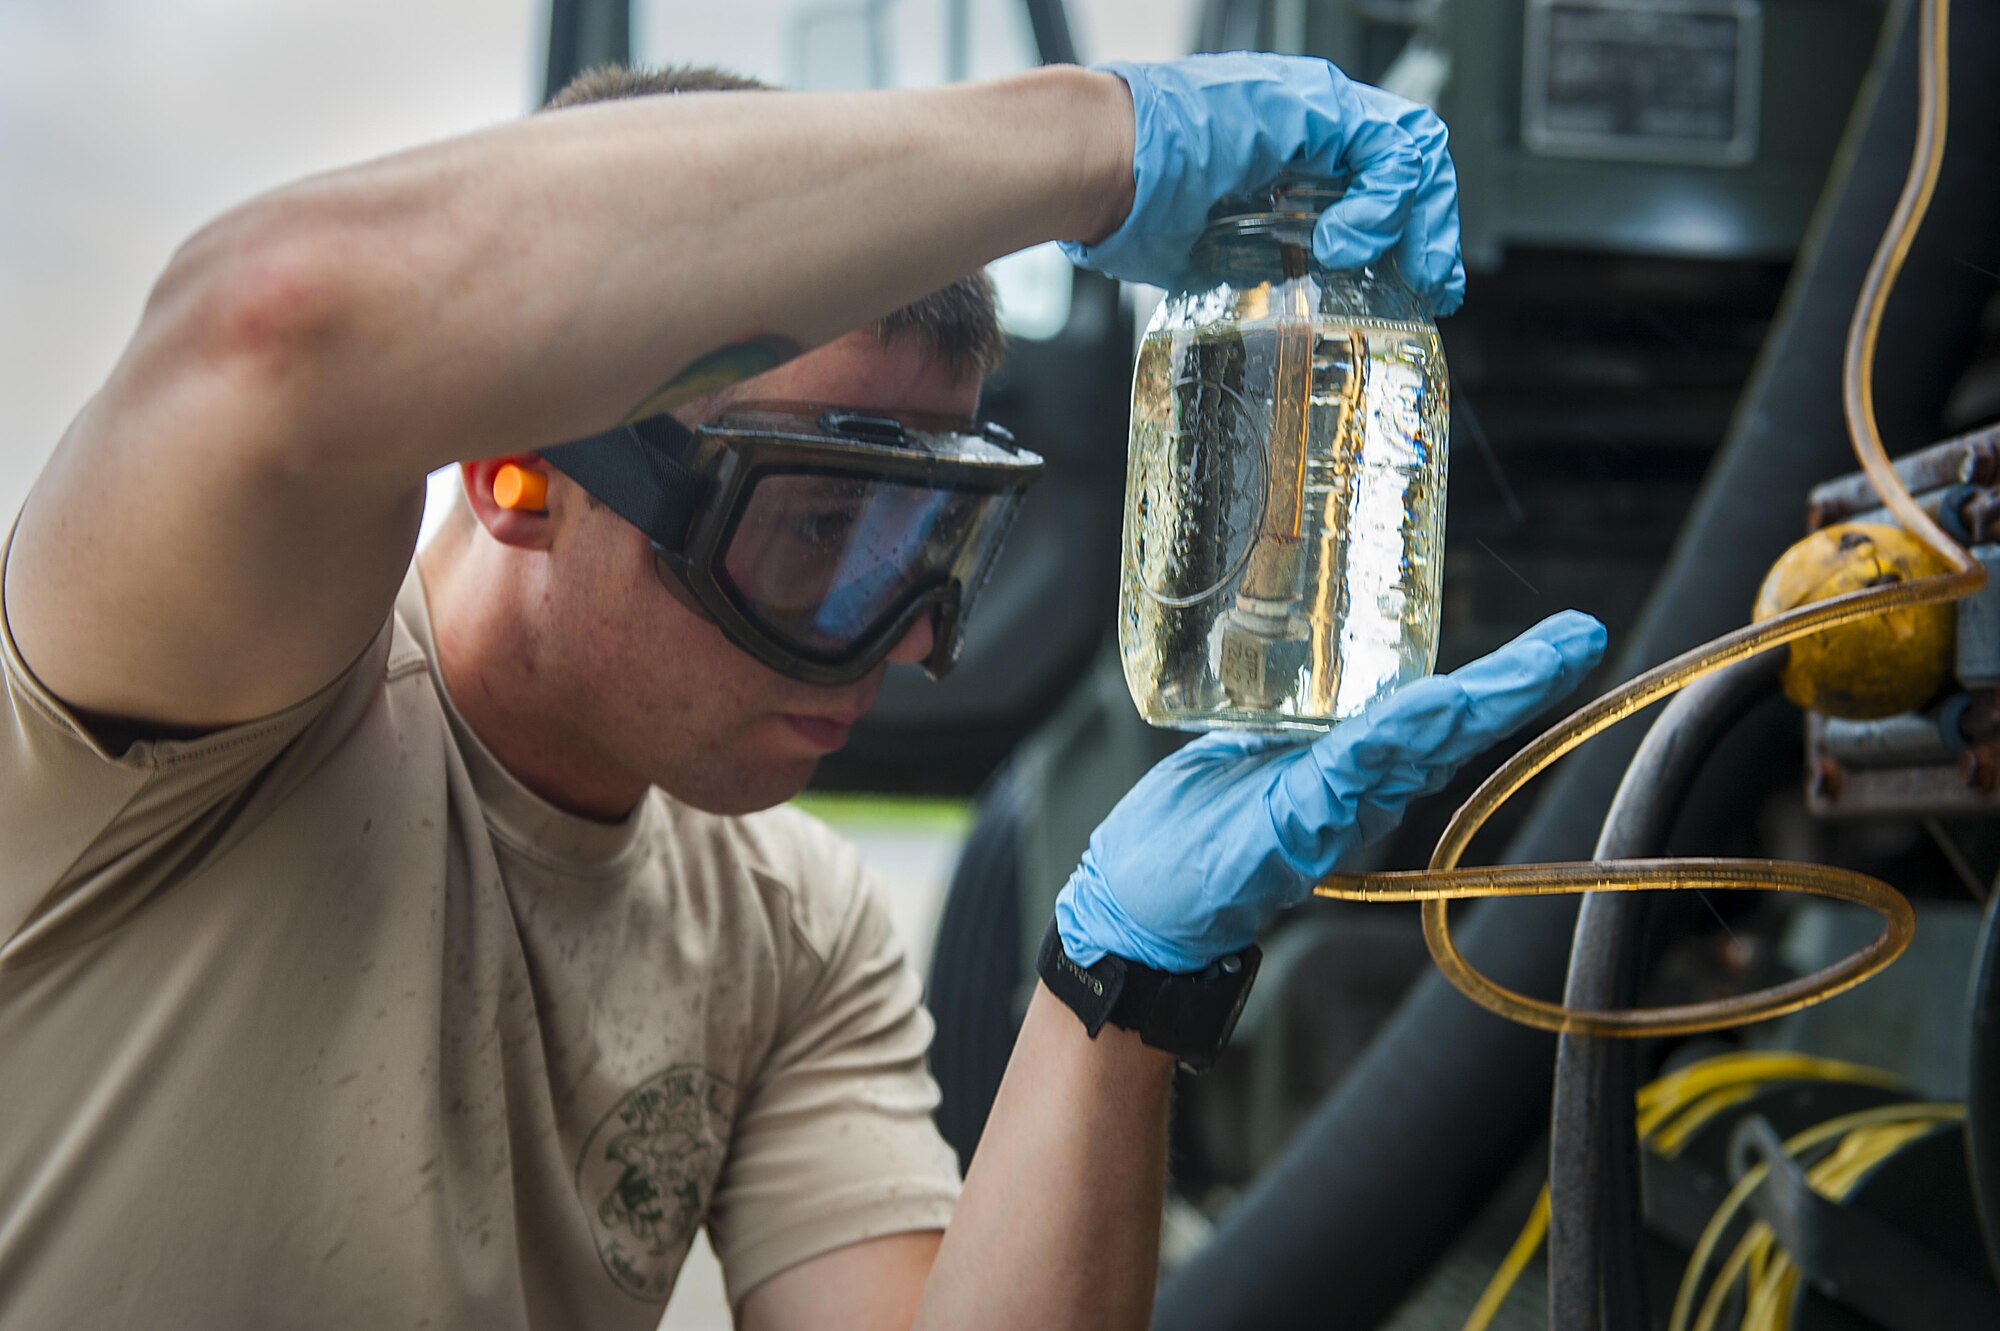 Staff Sgt. Nicholas Samuelson, an 18th Logistics Readiness Squadron fuels distribution supervisor, samples fuel from a pump house April 13, 2016, at Kadena Air Base, Japan. The fuel is pumped out of the ground by an R-12 refueling truck and tested for impurities before going into an aircraft. (U.S. Air Force photo/Airman 1st Class Corey M. Pettis)